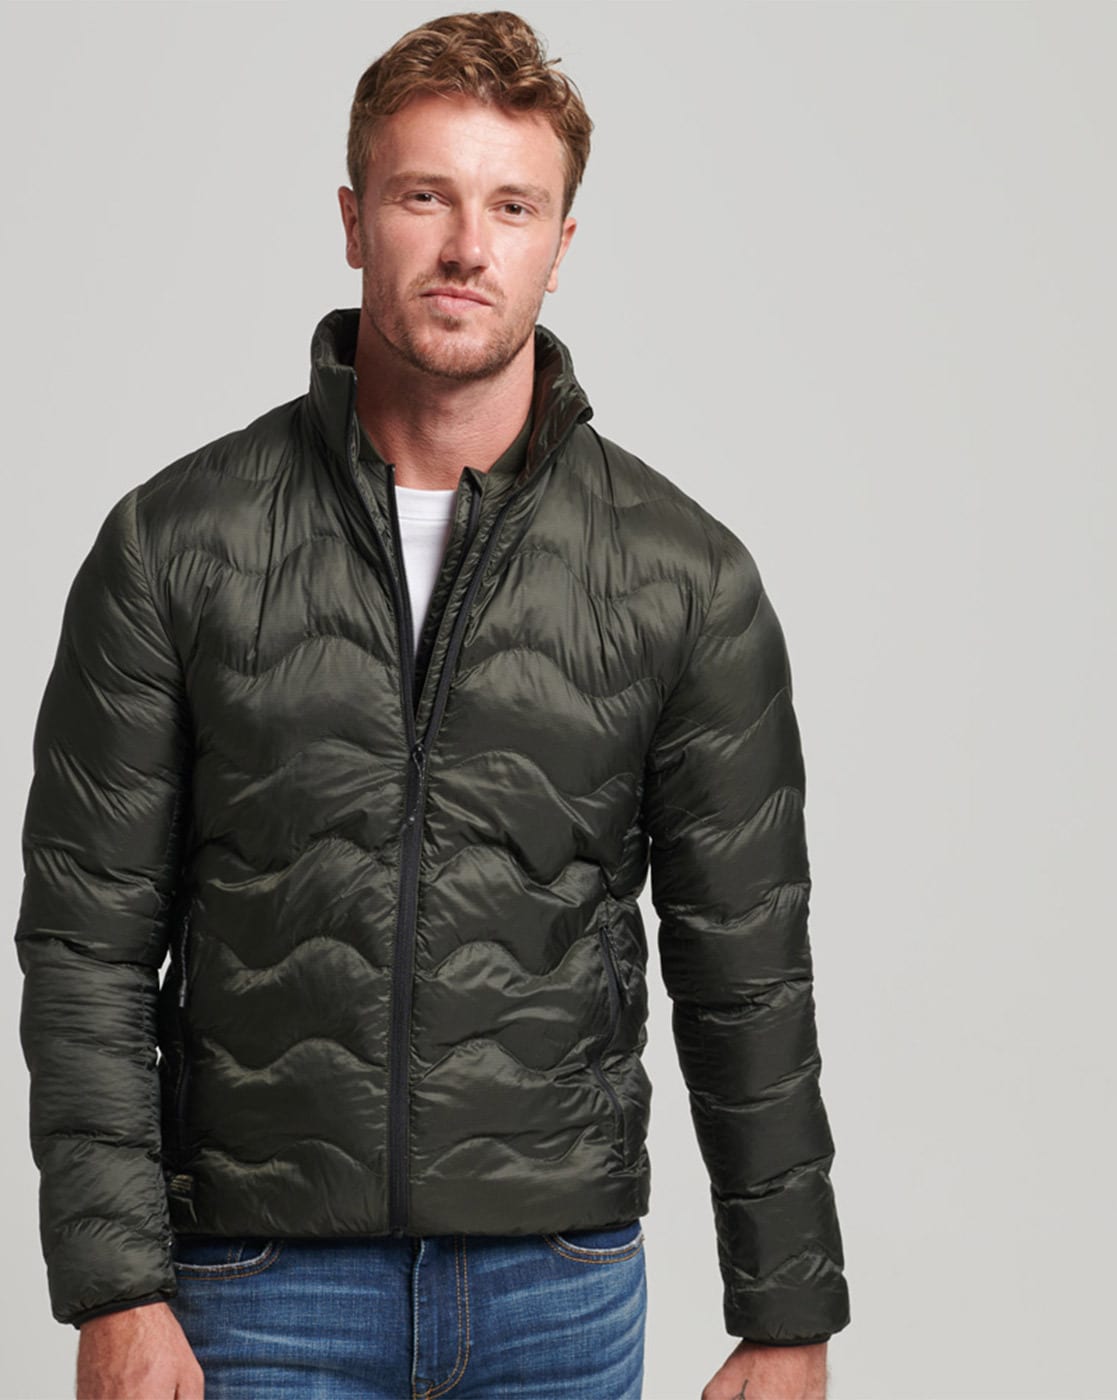 Superdry XPD Sports Luxe Puffer Jacket - Men's Mens Jackets